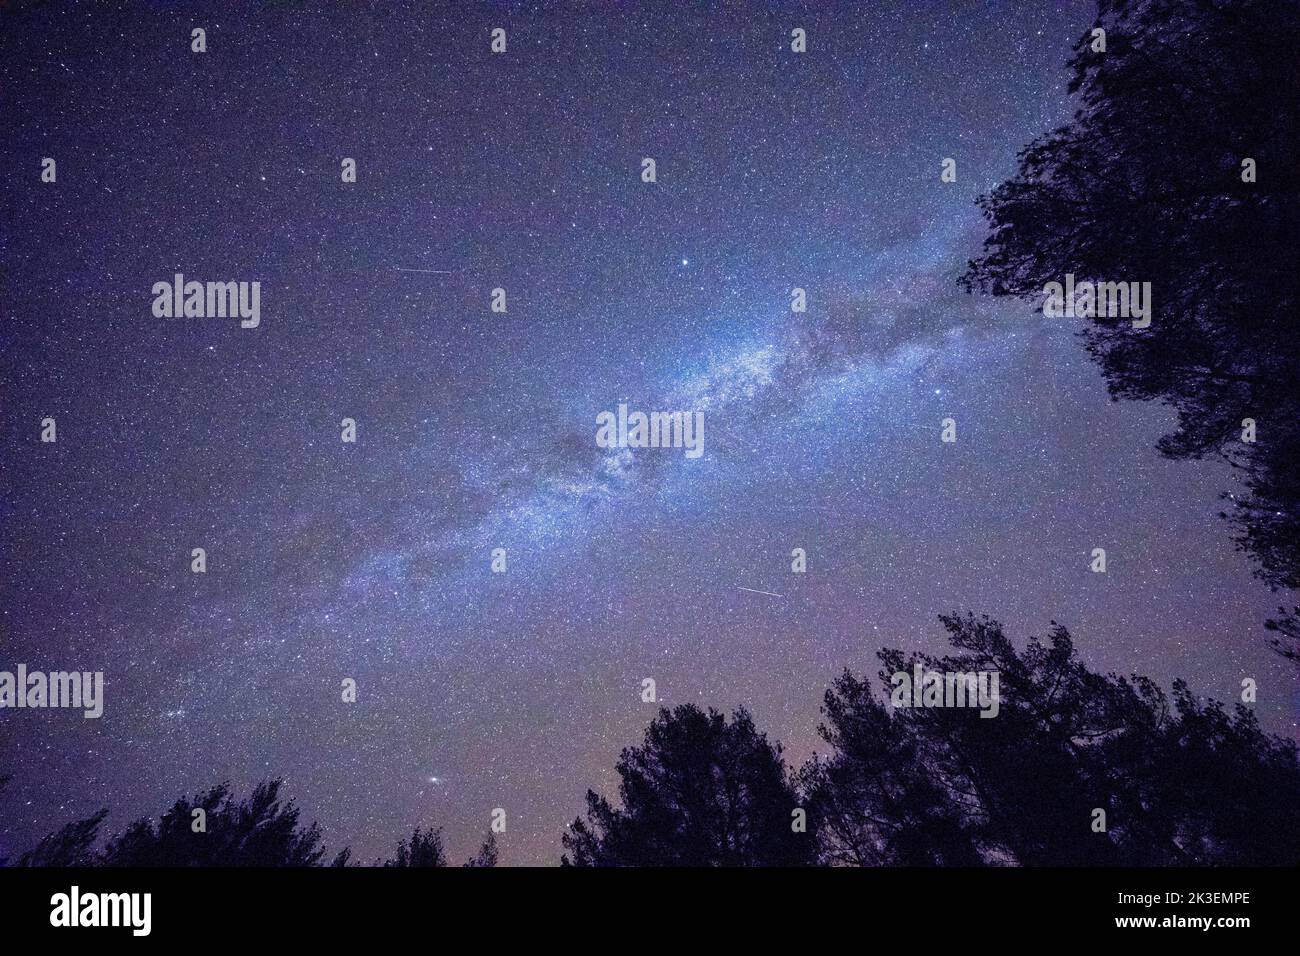 Starry sky with Milky way seen from mountain through trees in forest Stock Photo